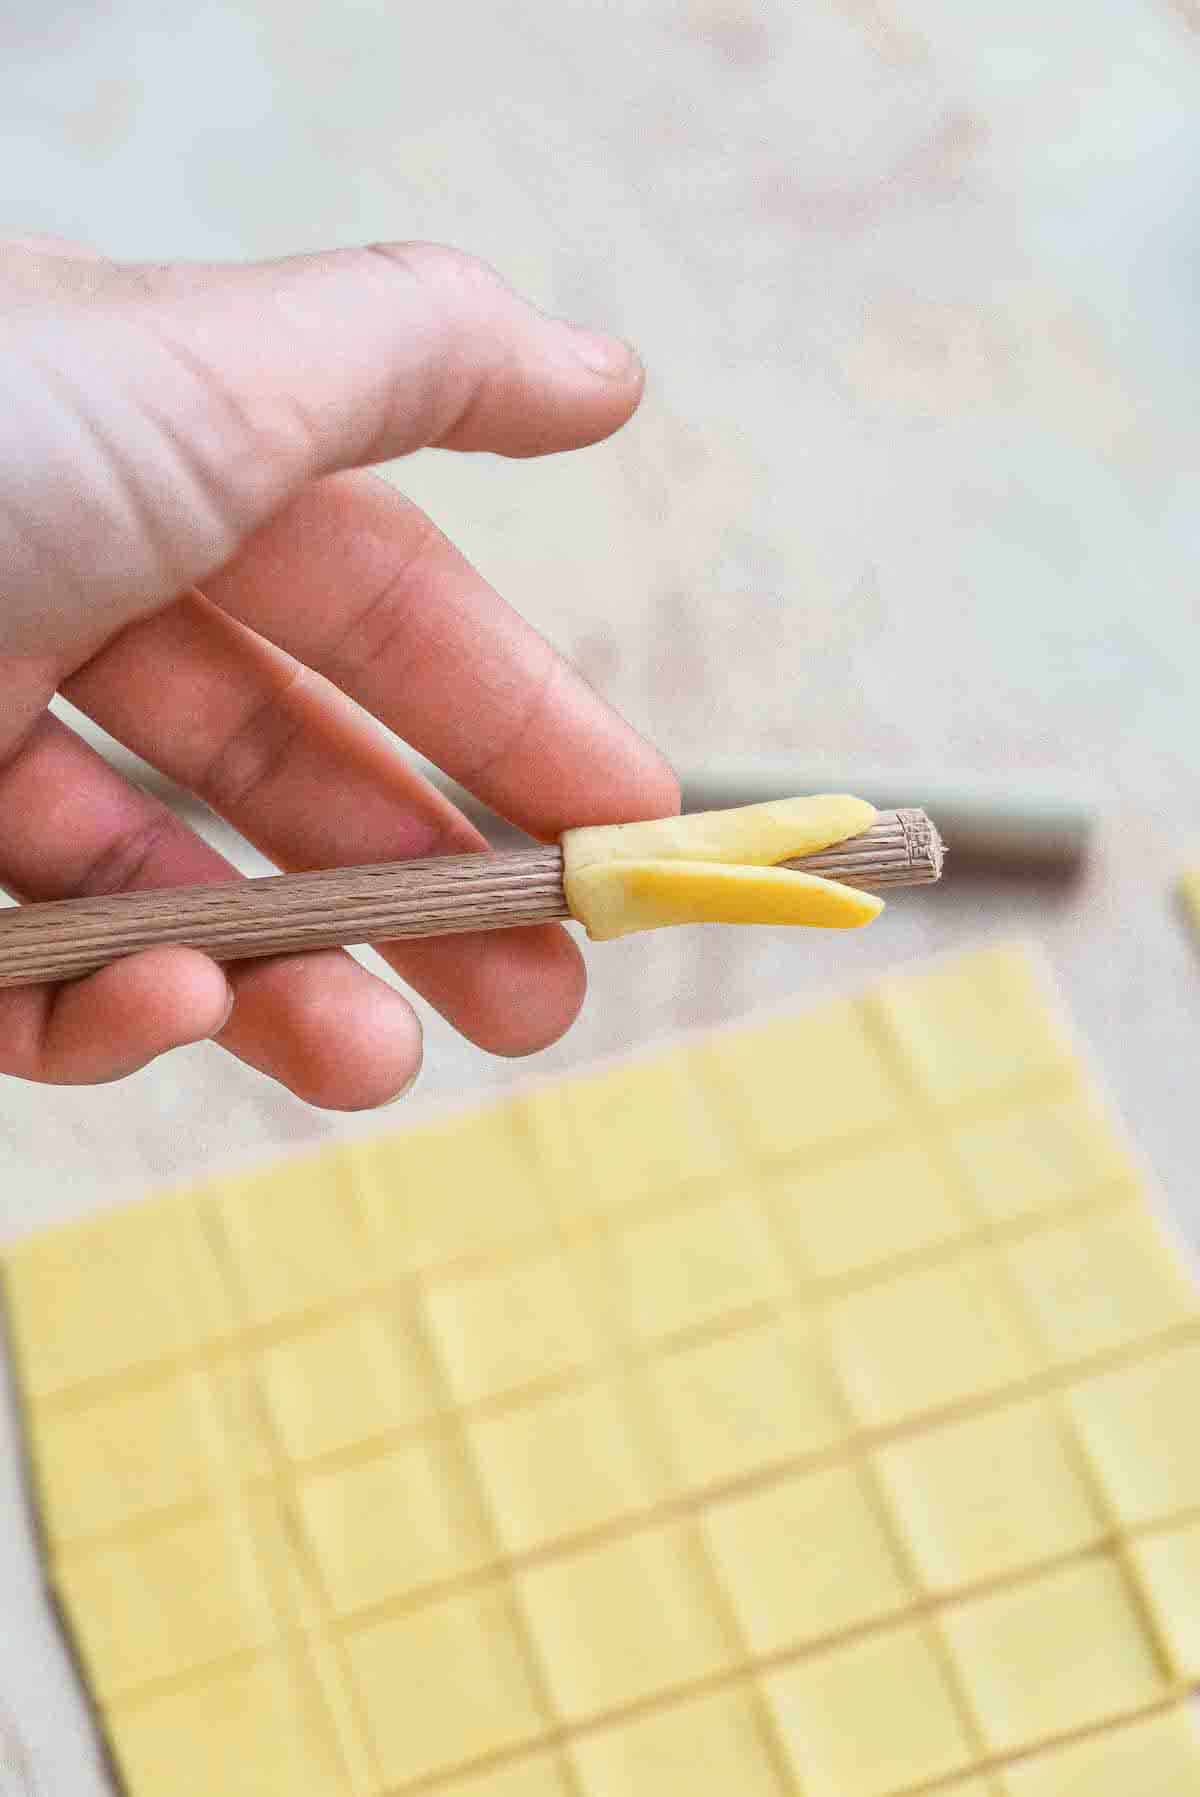 A square of pasta dough almost fully rolled into a tube over a ridged wooden dowel.